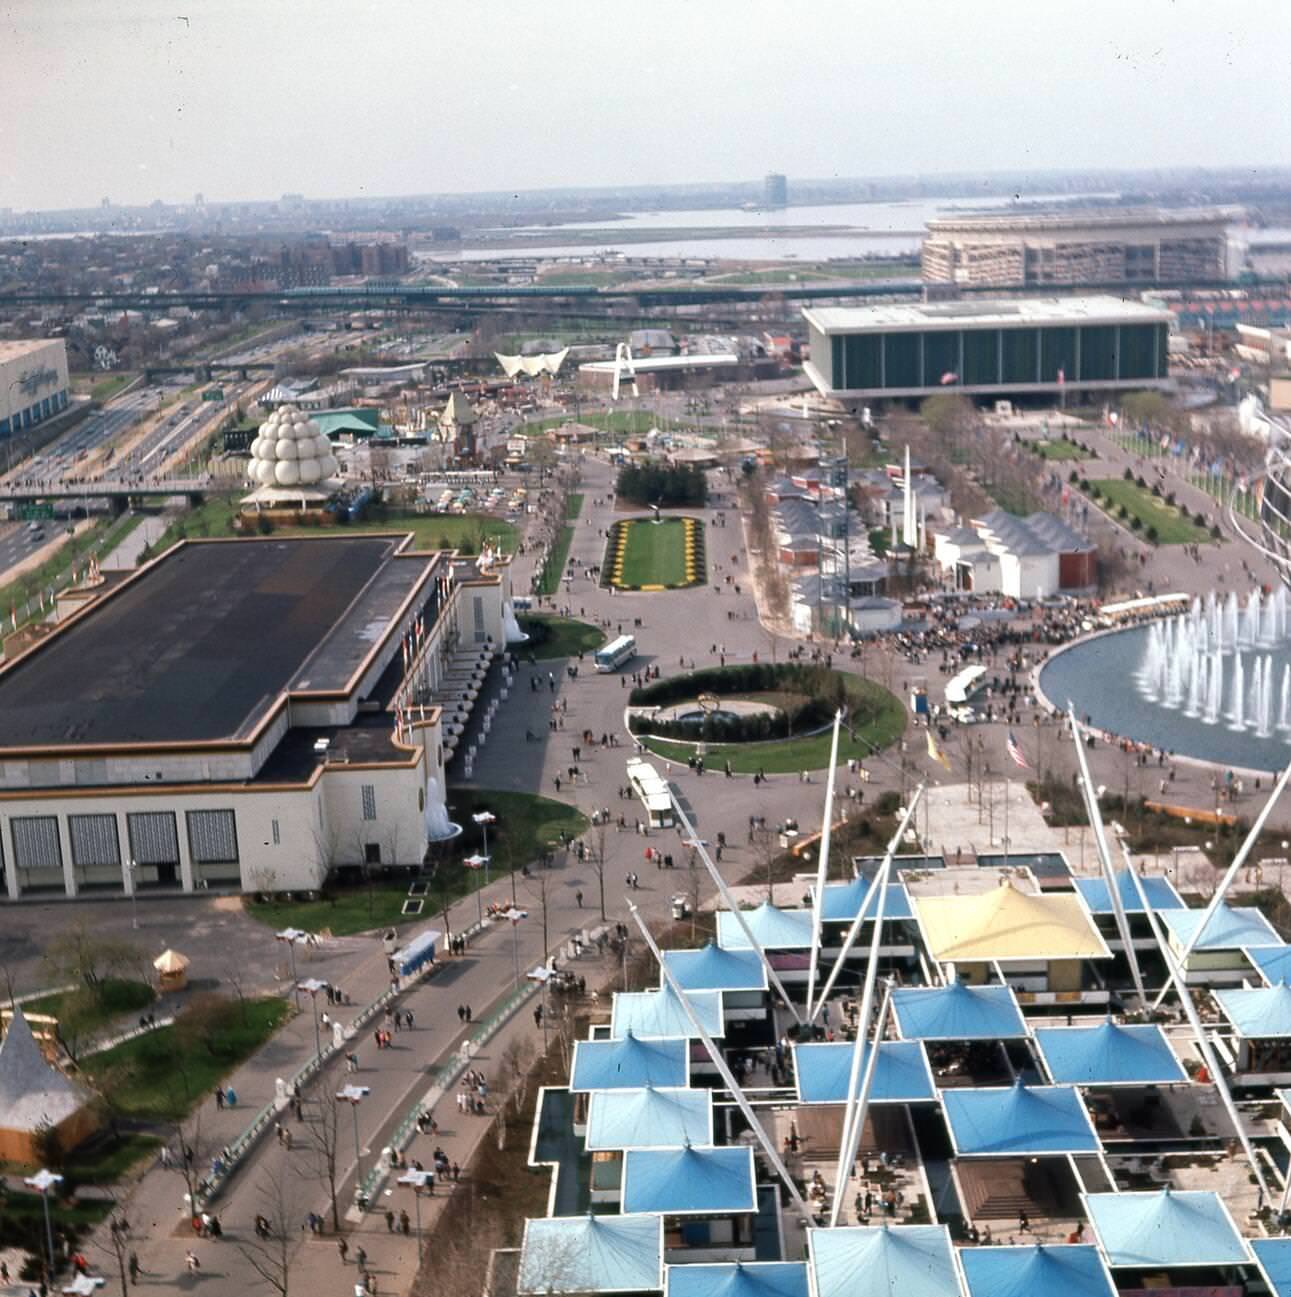 A Panoramic Aerial View From The New York State Pavilion Observation Towers At The New York World'S Fair, Flushing Meadows Park, 1964.